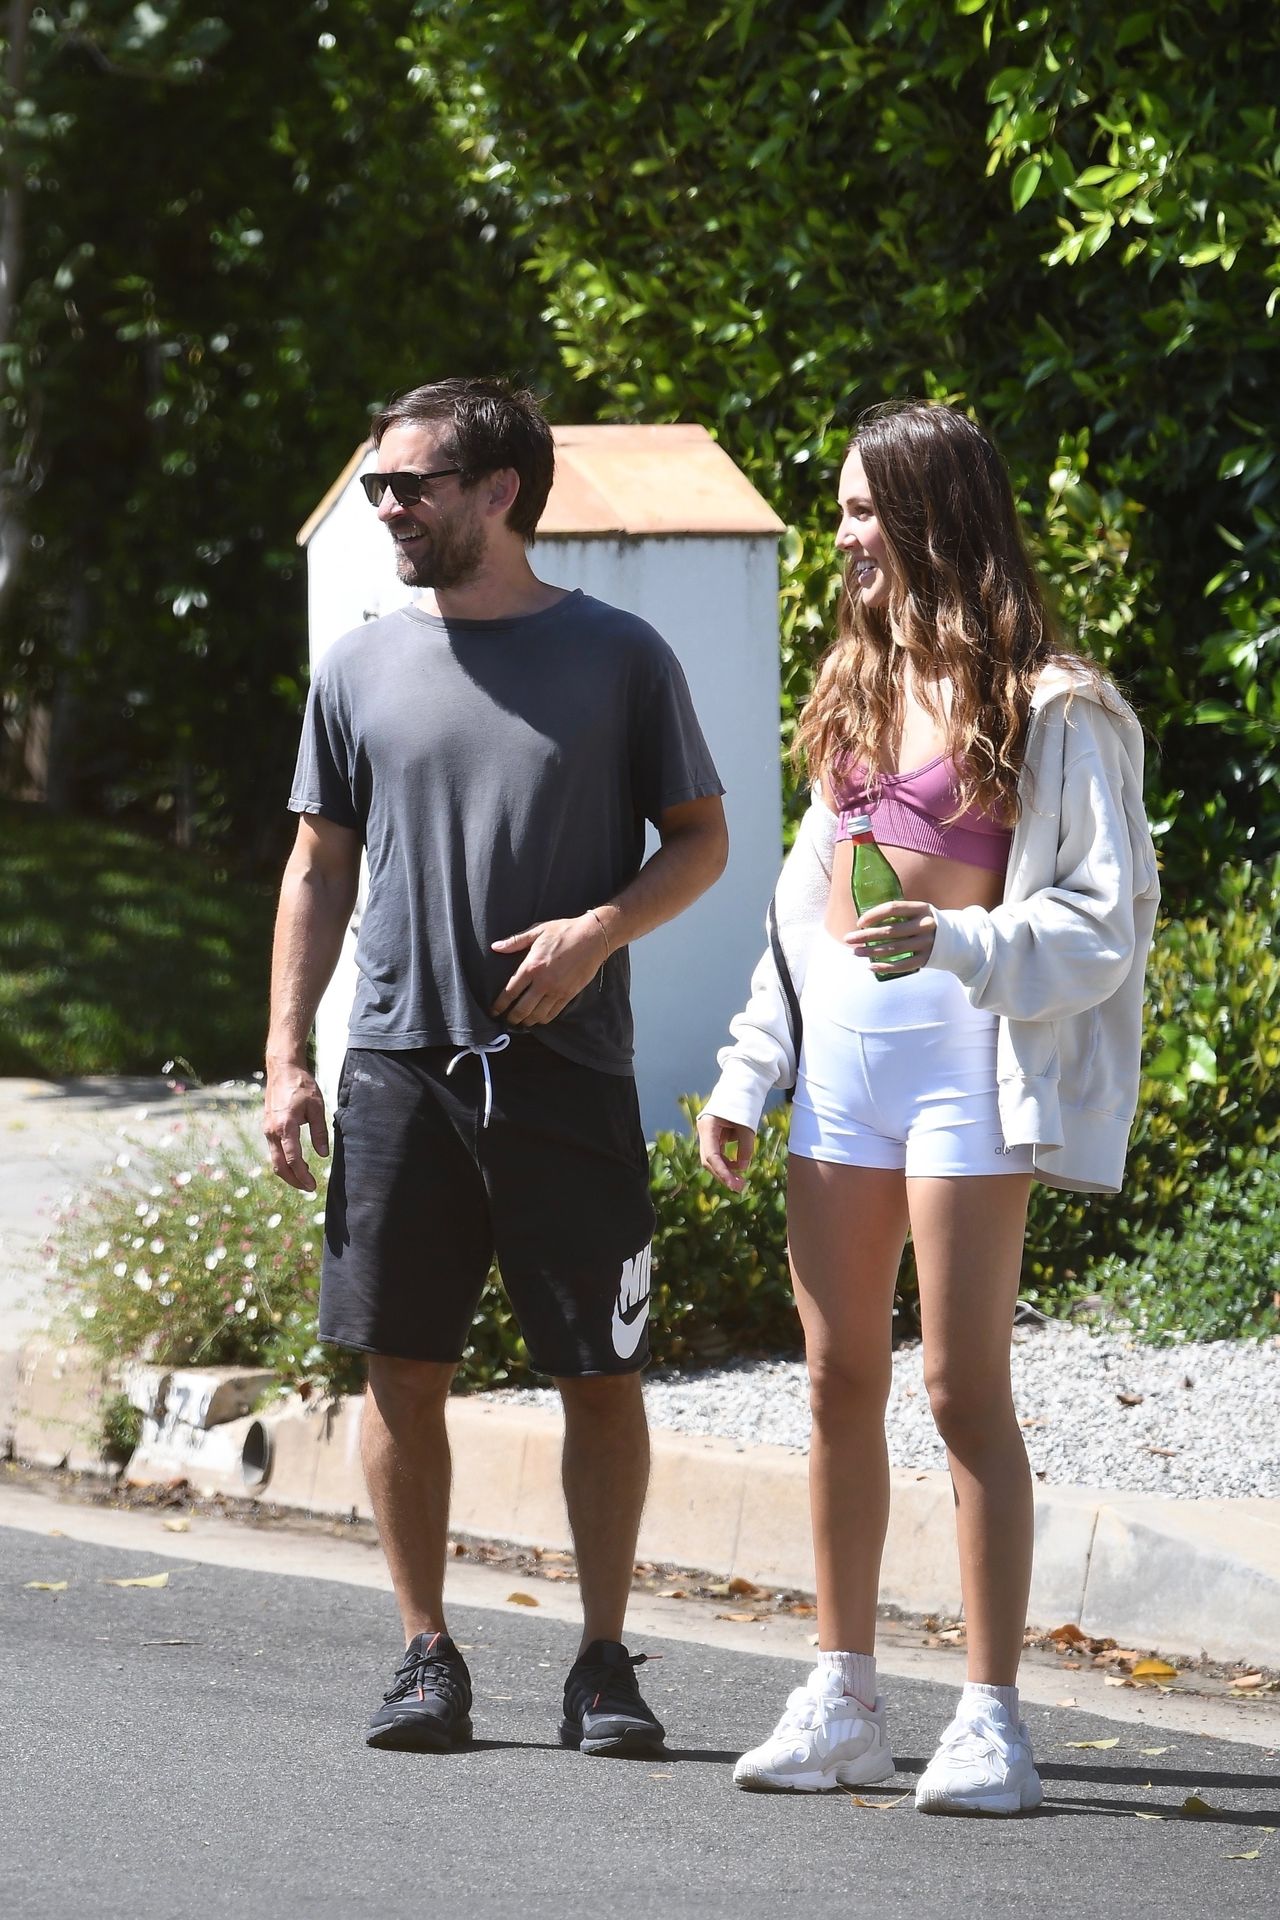 Tobey Maguire & Tatiana Dieteman Get in a
Afternoon Walk (49 Photos)